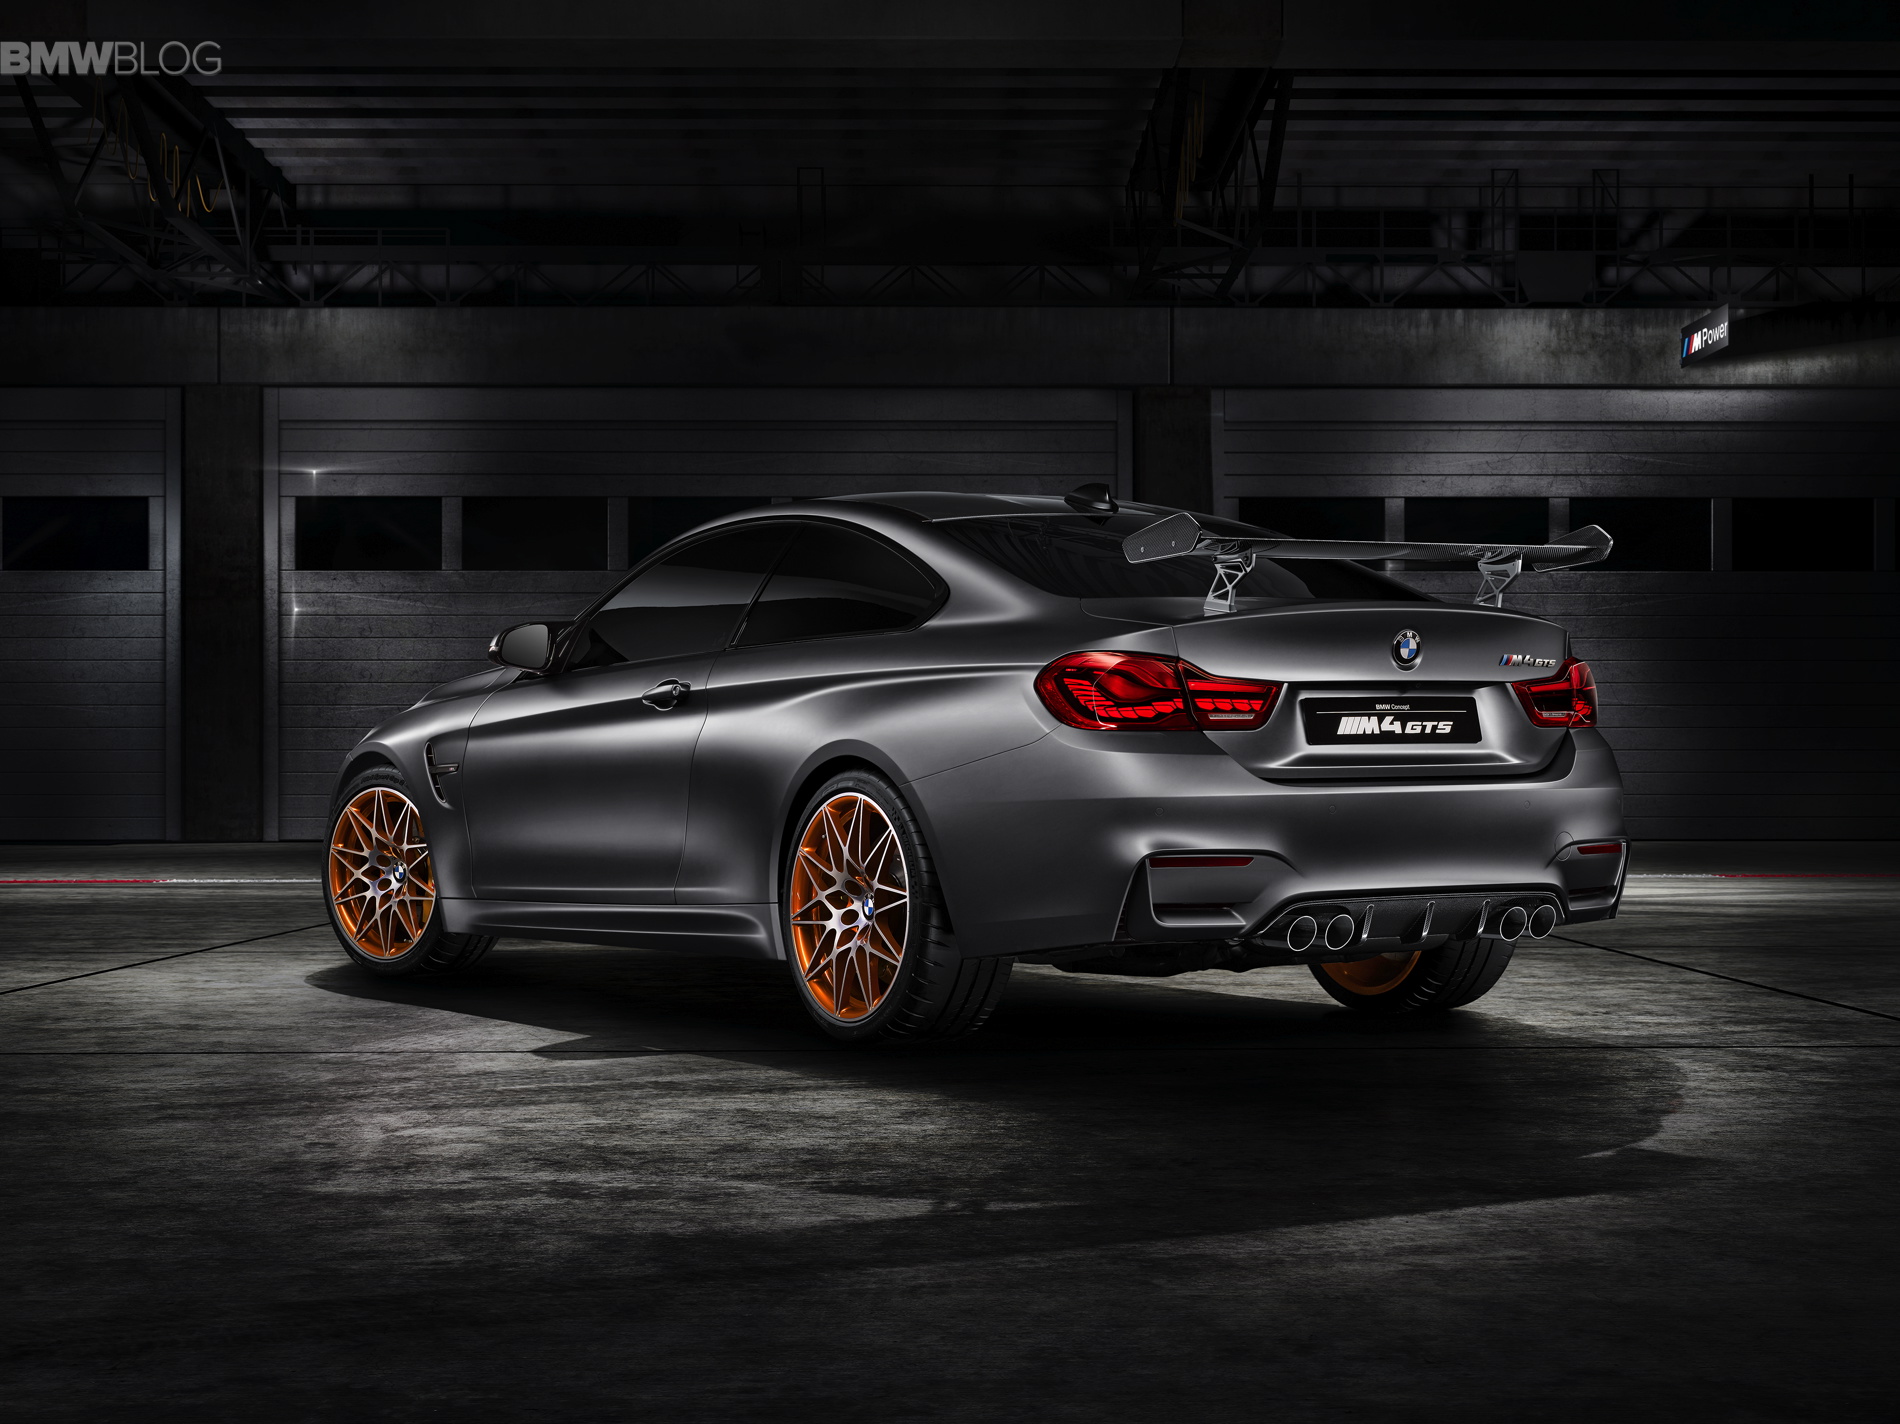 HQ BMW M4 Concept Wallpapers | File 622.4Kb